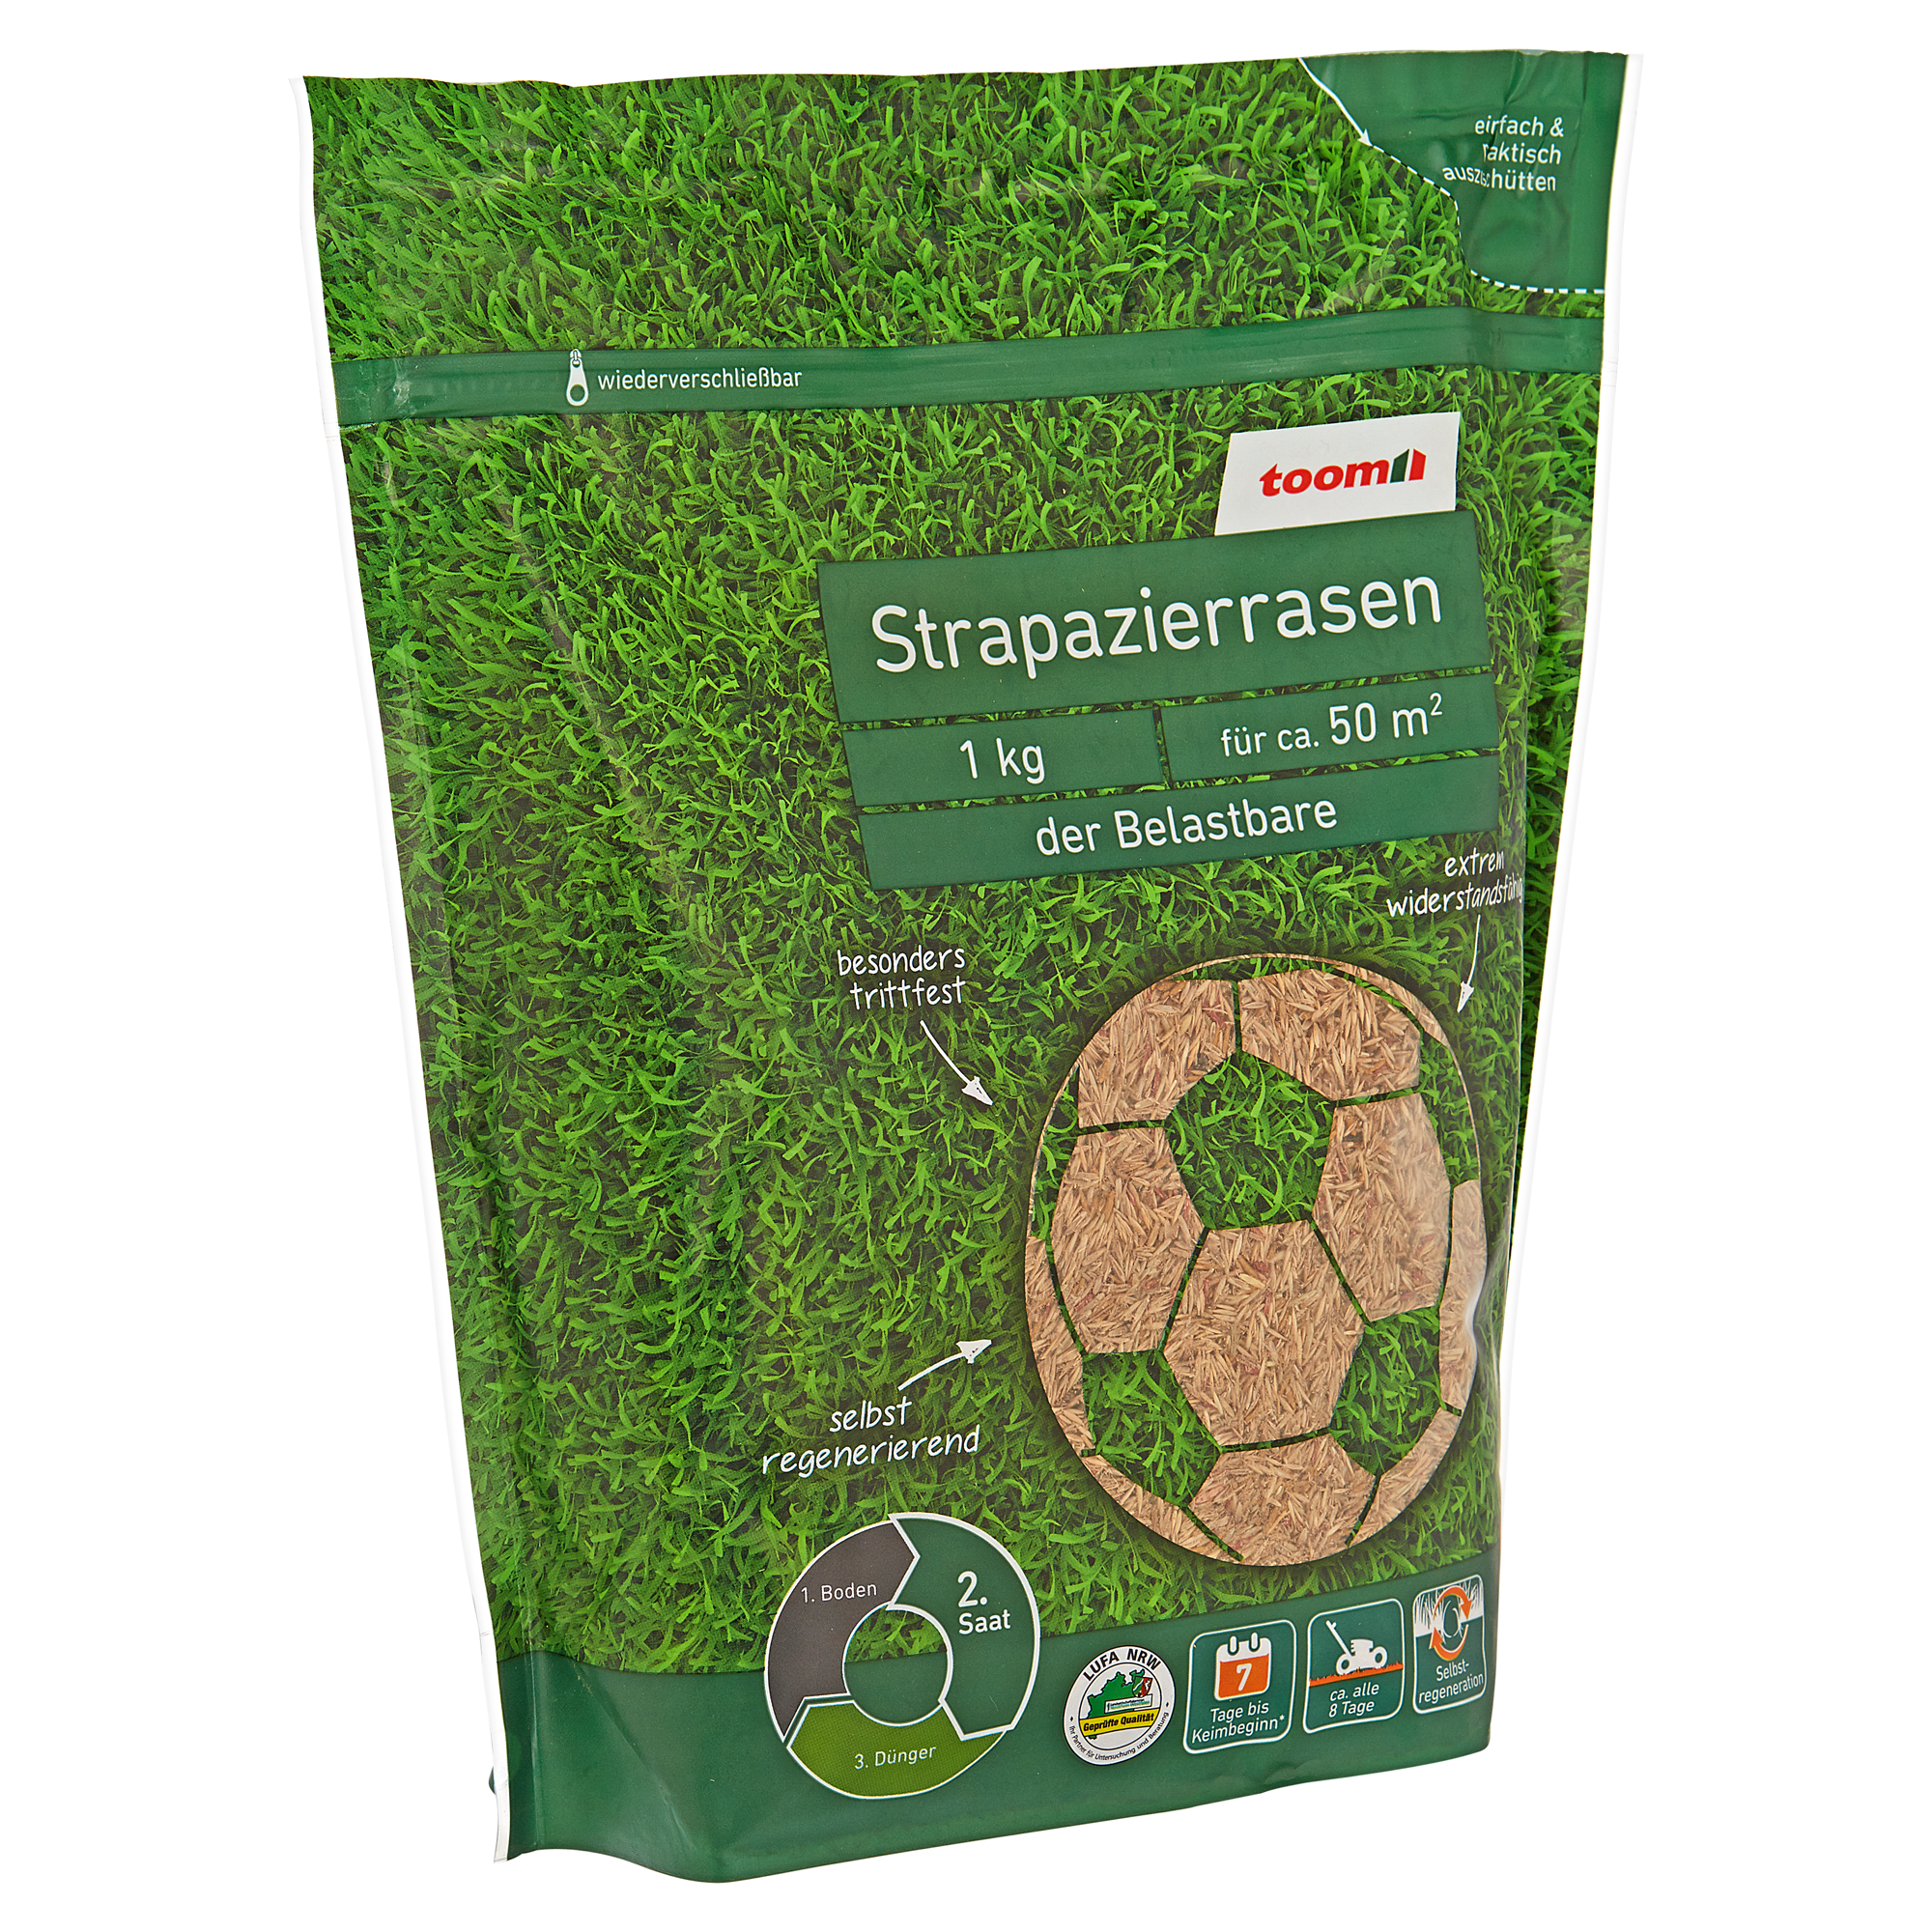 Strapazierrasen 1 kg + product picture